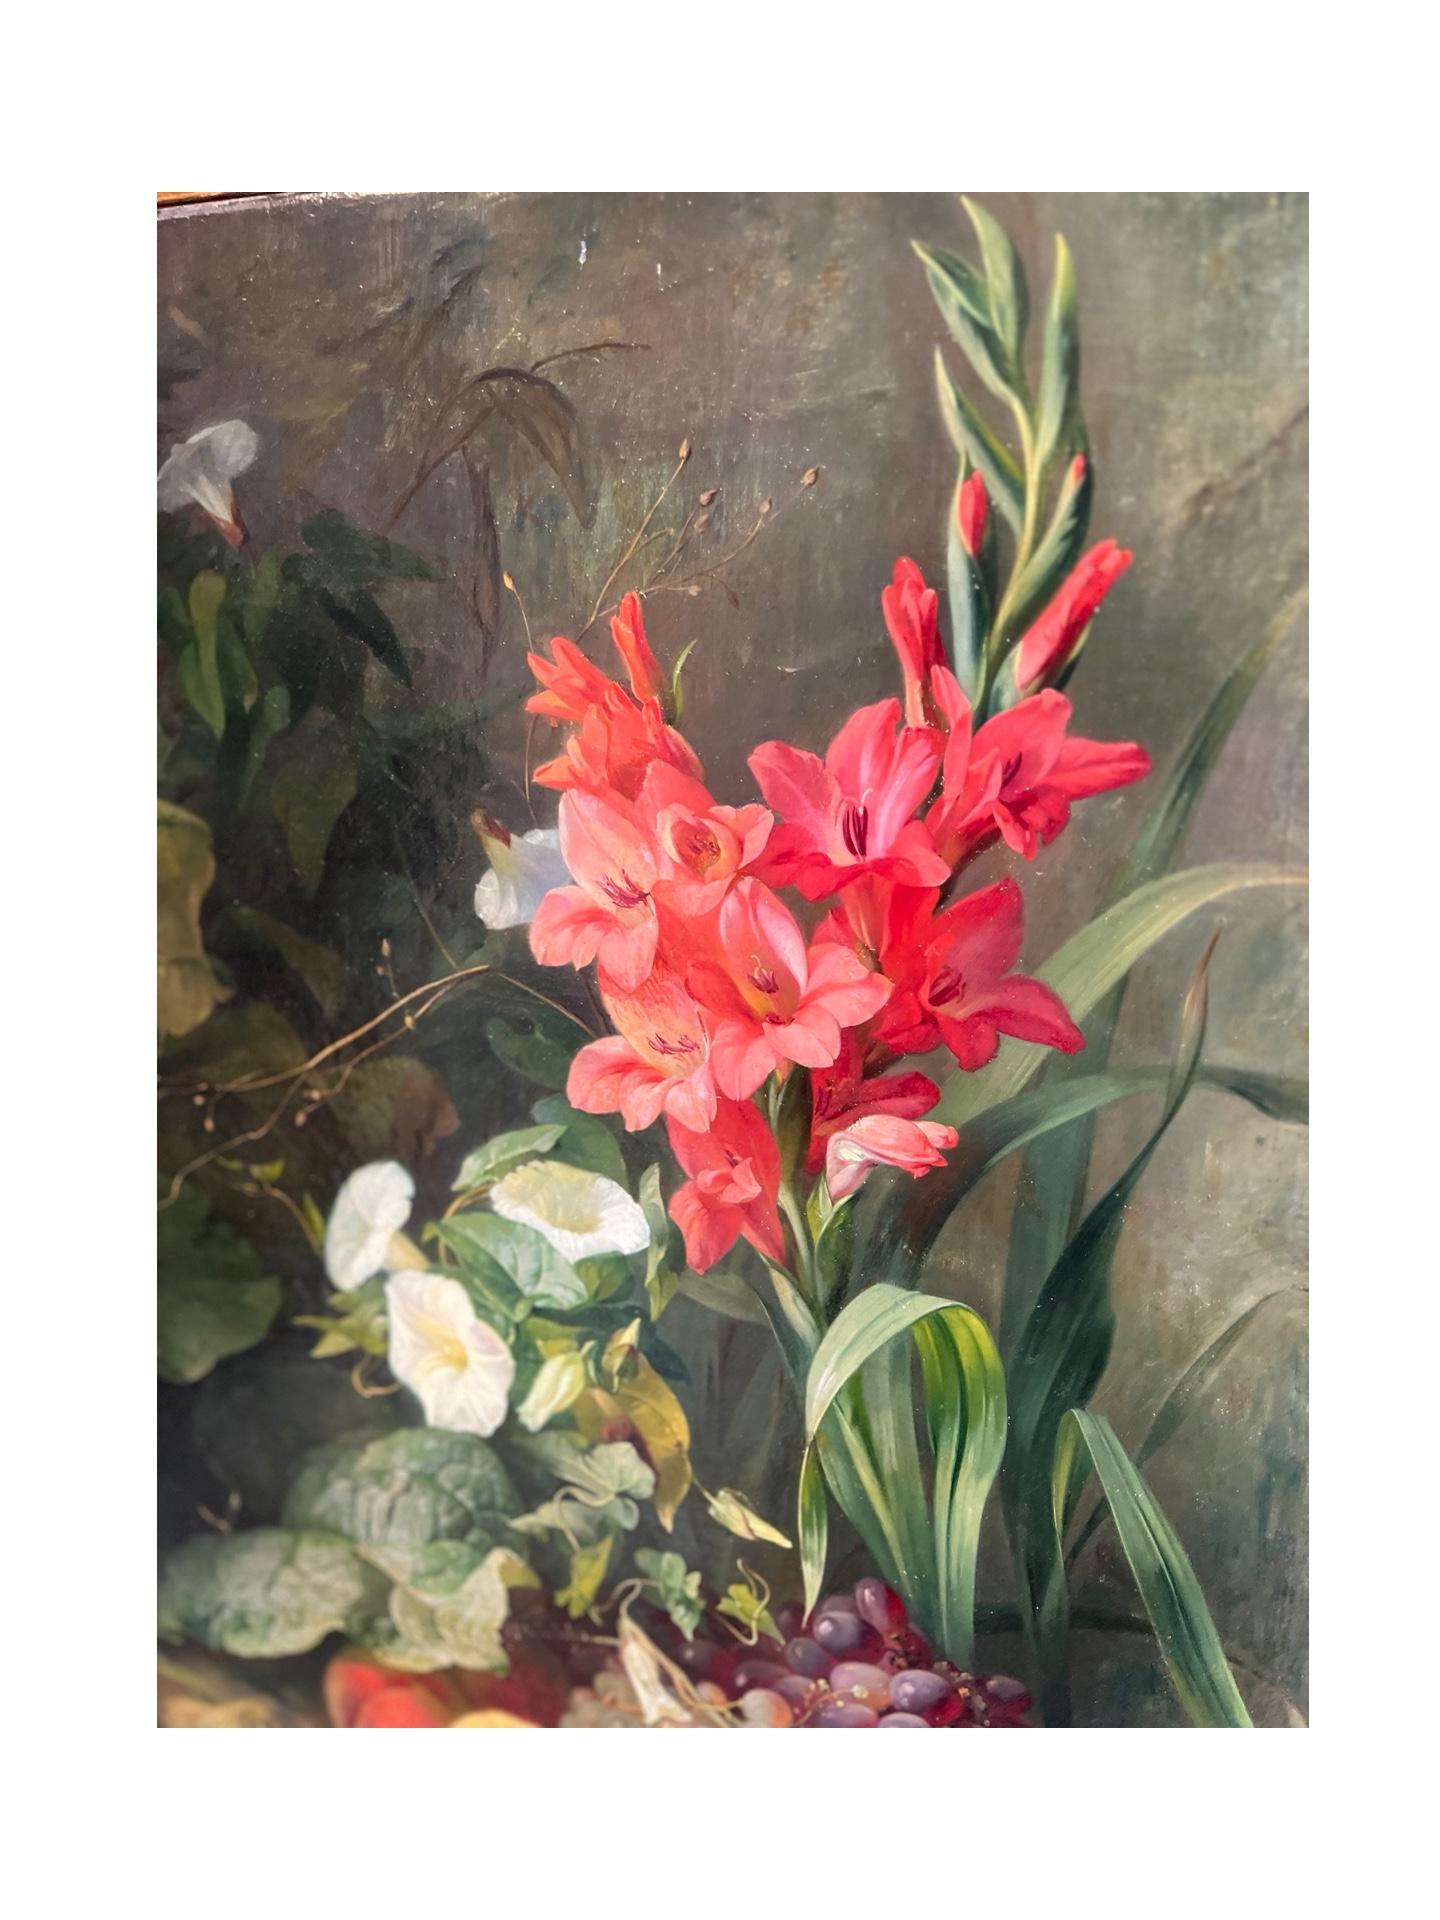 Elise Puyroche-Wagner (German, 1828-1895), Floral Naturalistic Painting C. 1853 For Sale 3